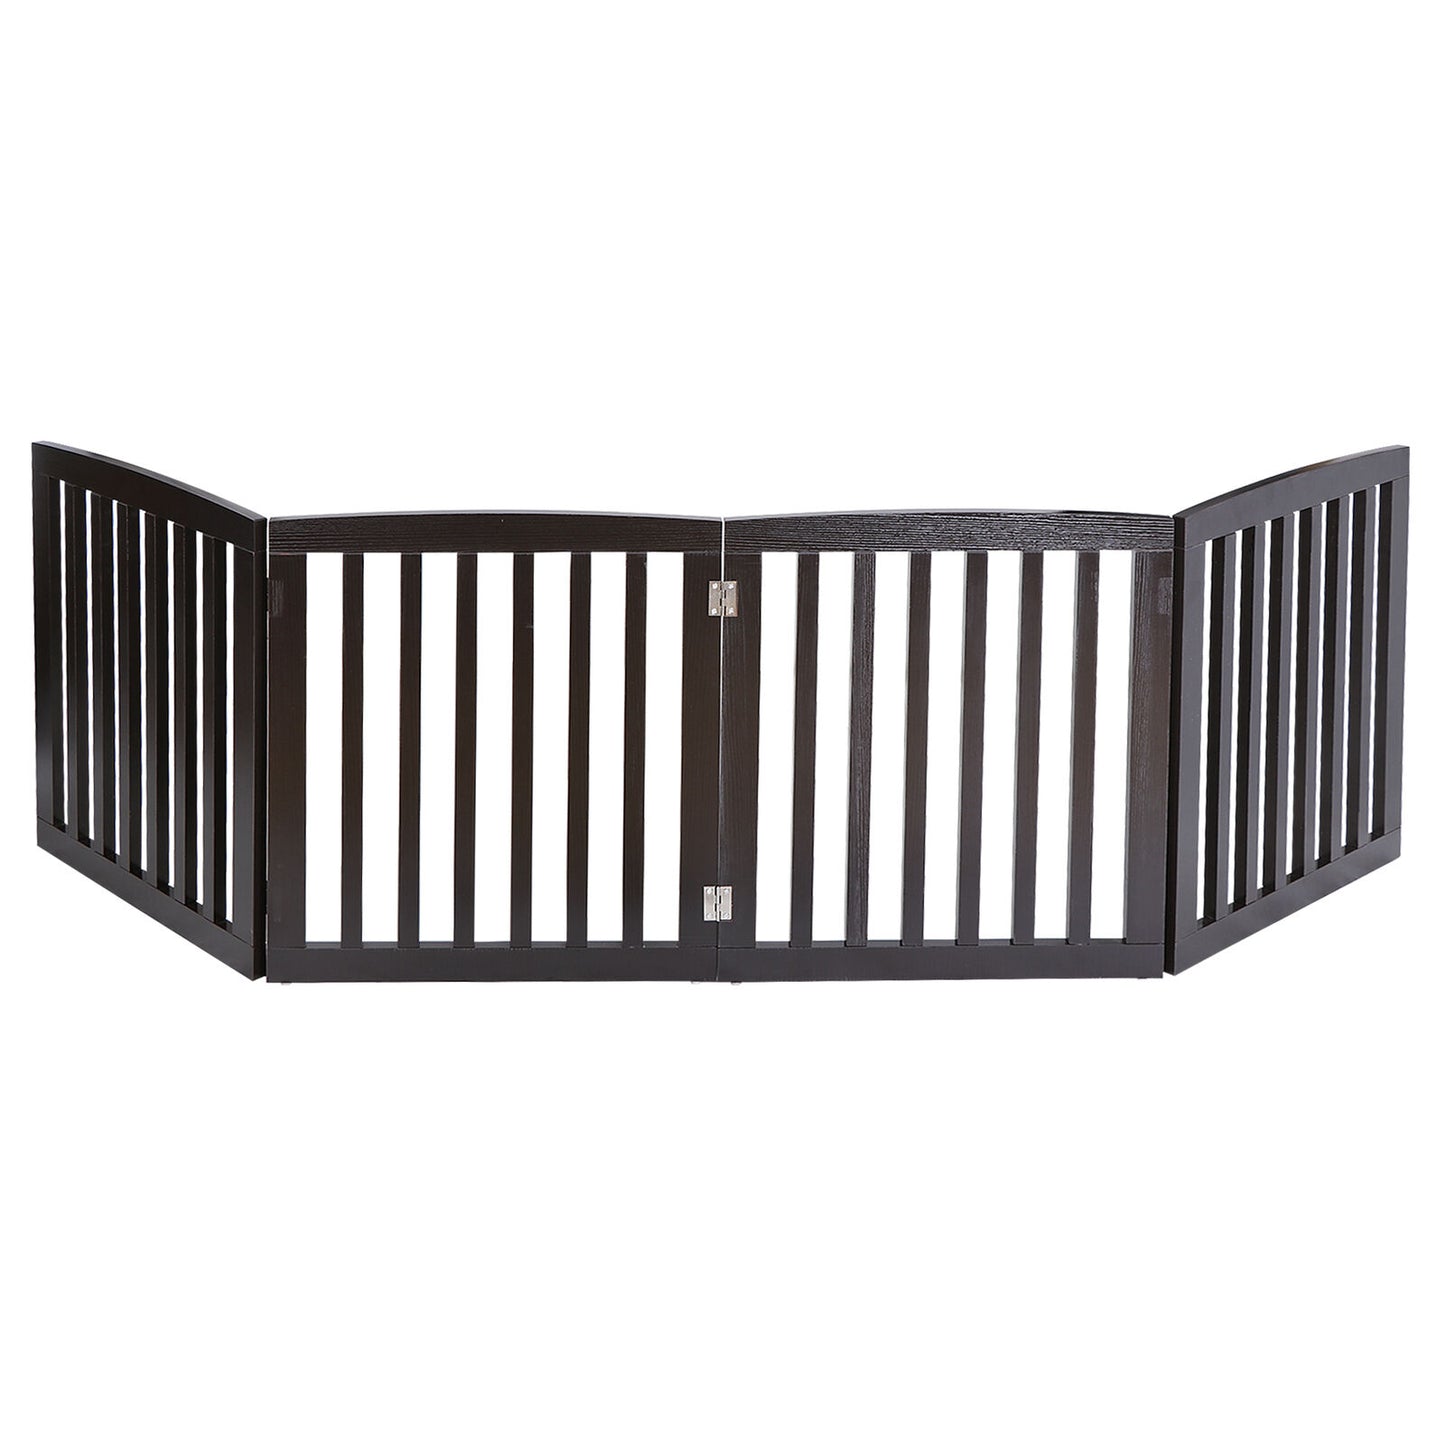 24 inch 4 Panels Fence Dog Gate Freestanding Foldable Step Over for The Doorway